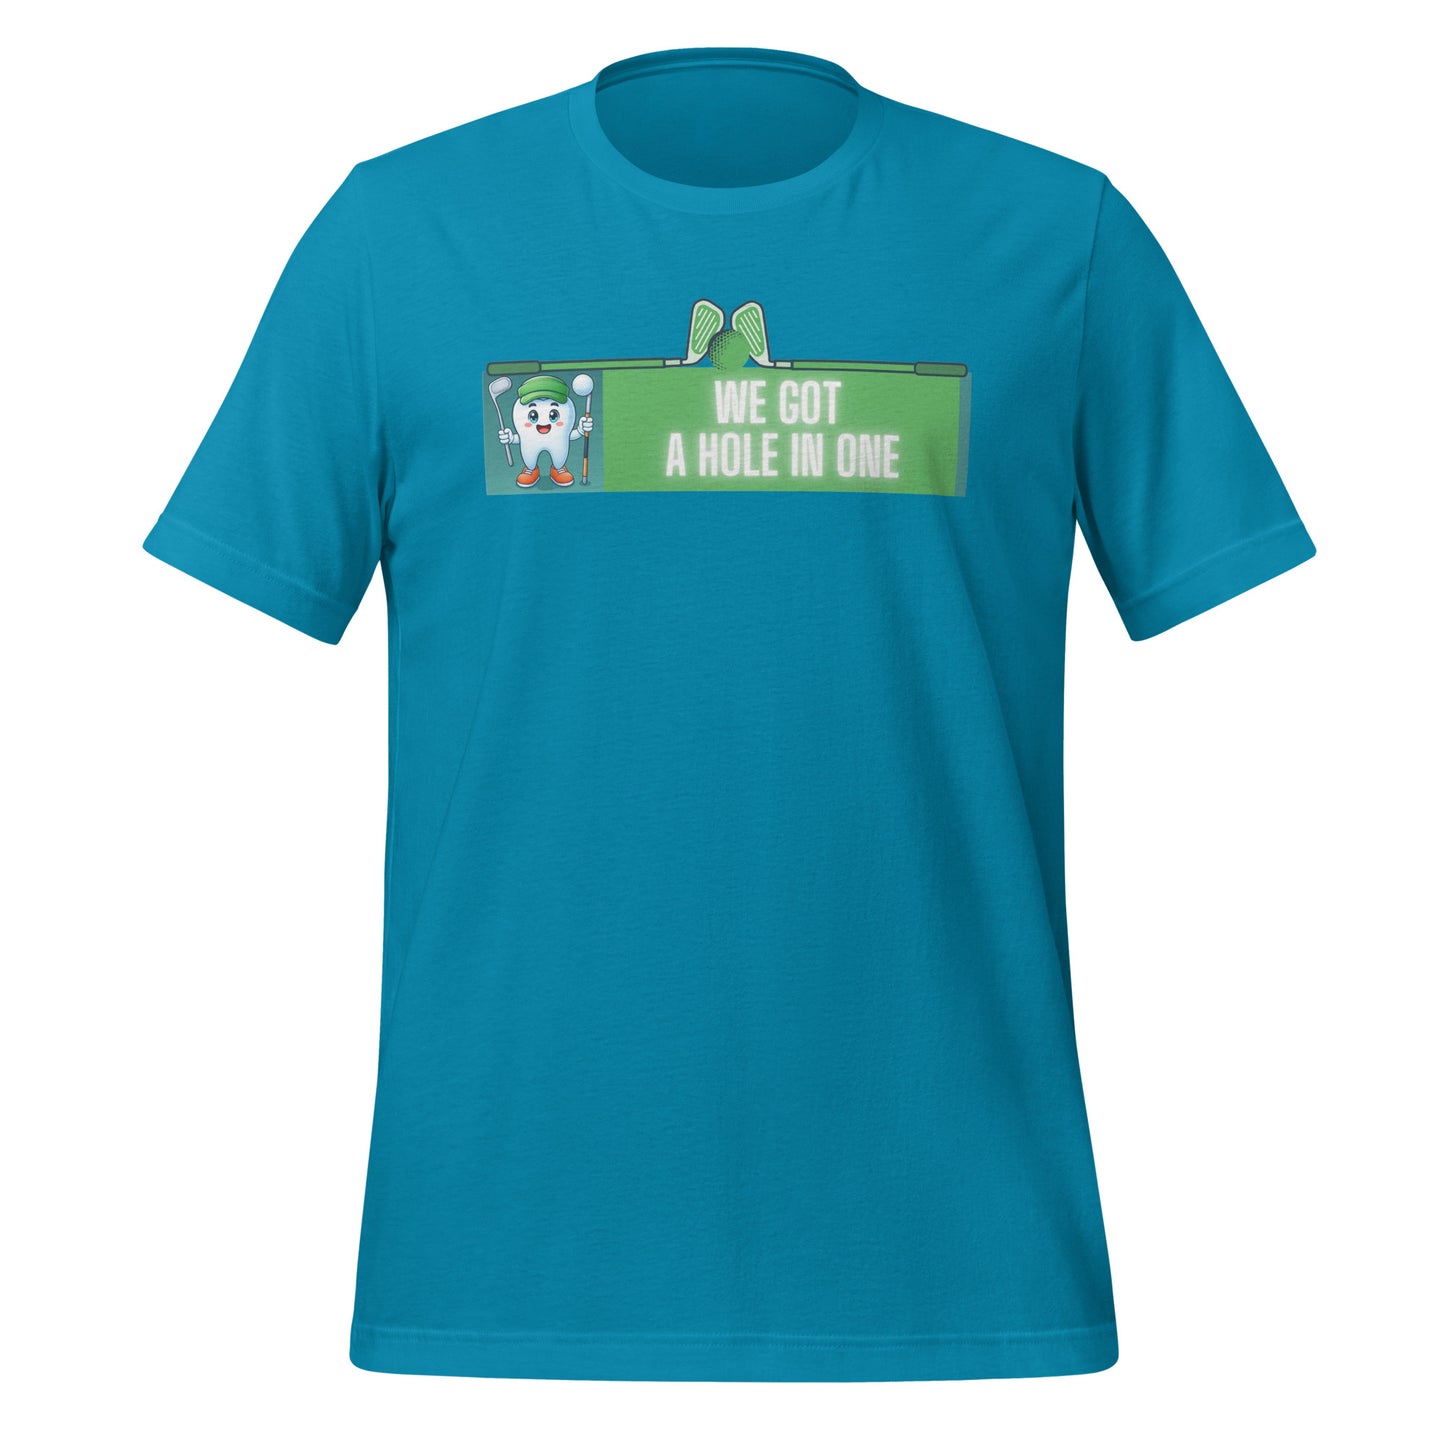 Cute dentist t-shirt showcasing an adorable tooth character in golf attire, joyfully celebrating a ‘hole in one’ achievement, perfect for dentist and dental professionals seeking unique and thematic dental apparel. Aqua color, front view.